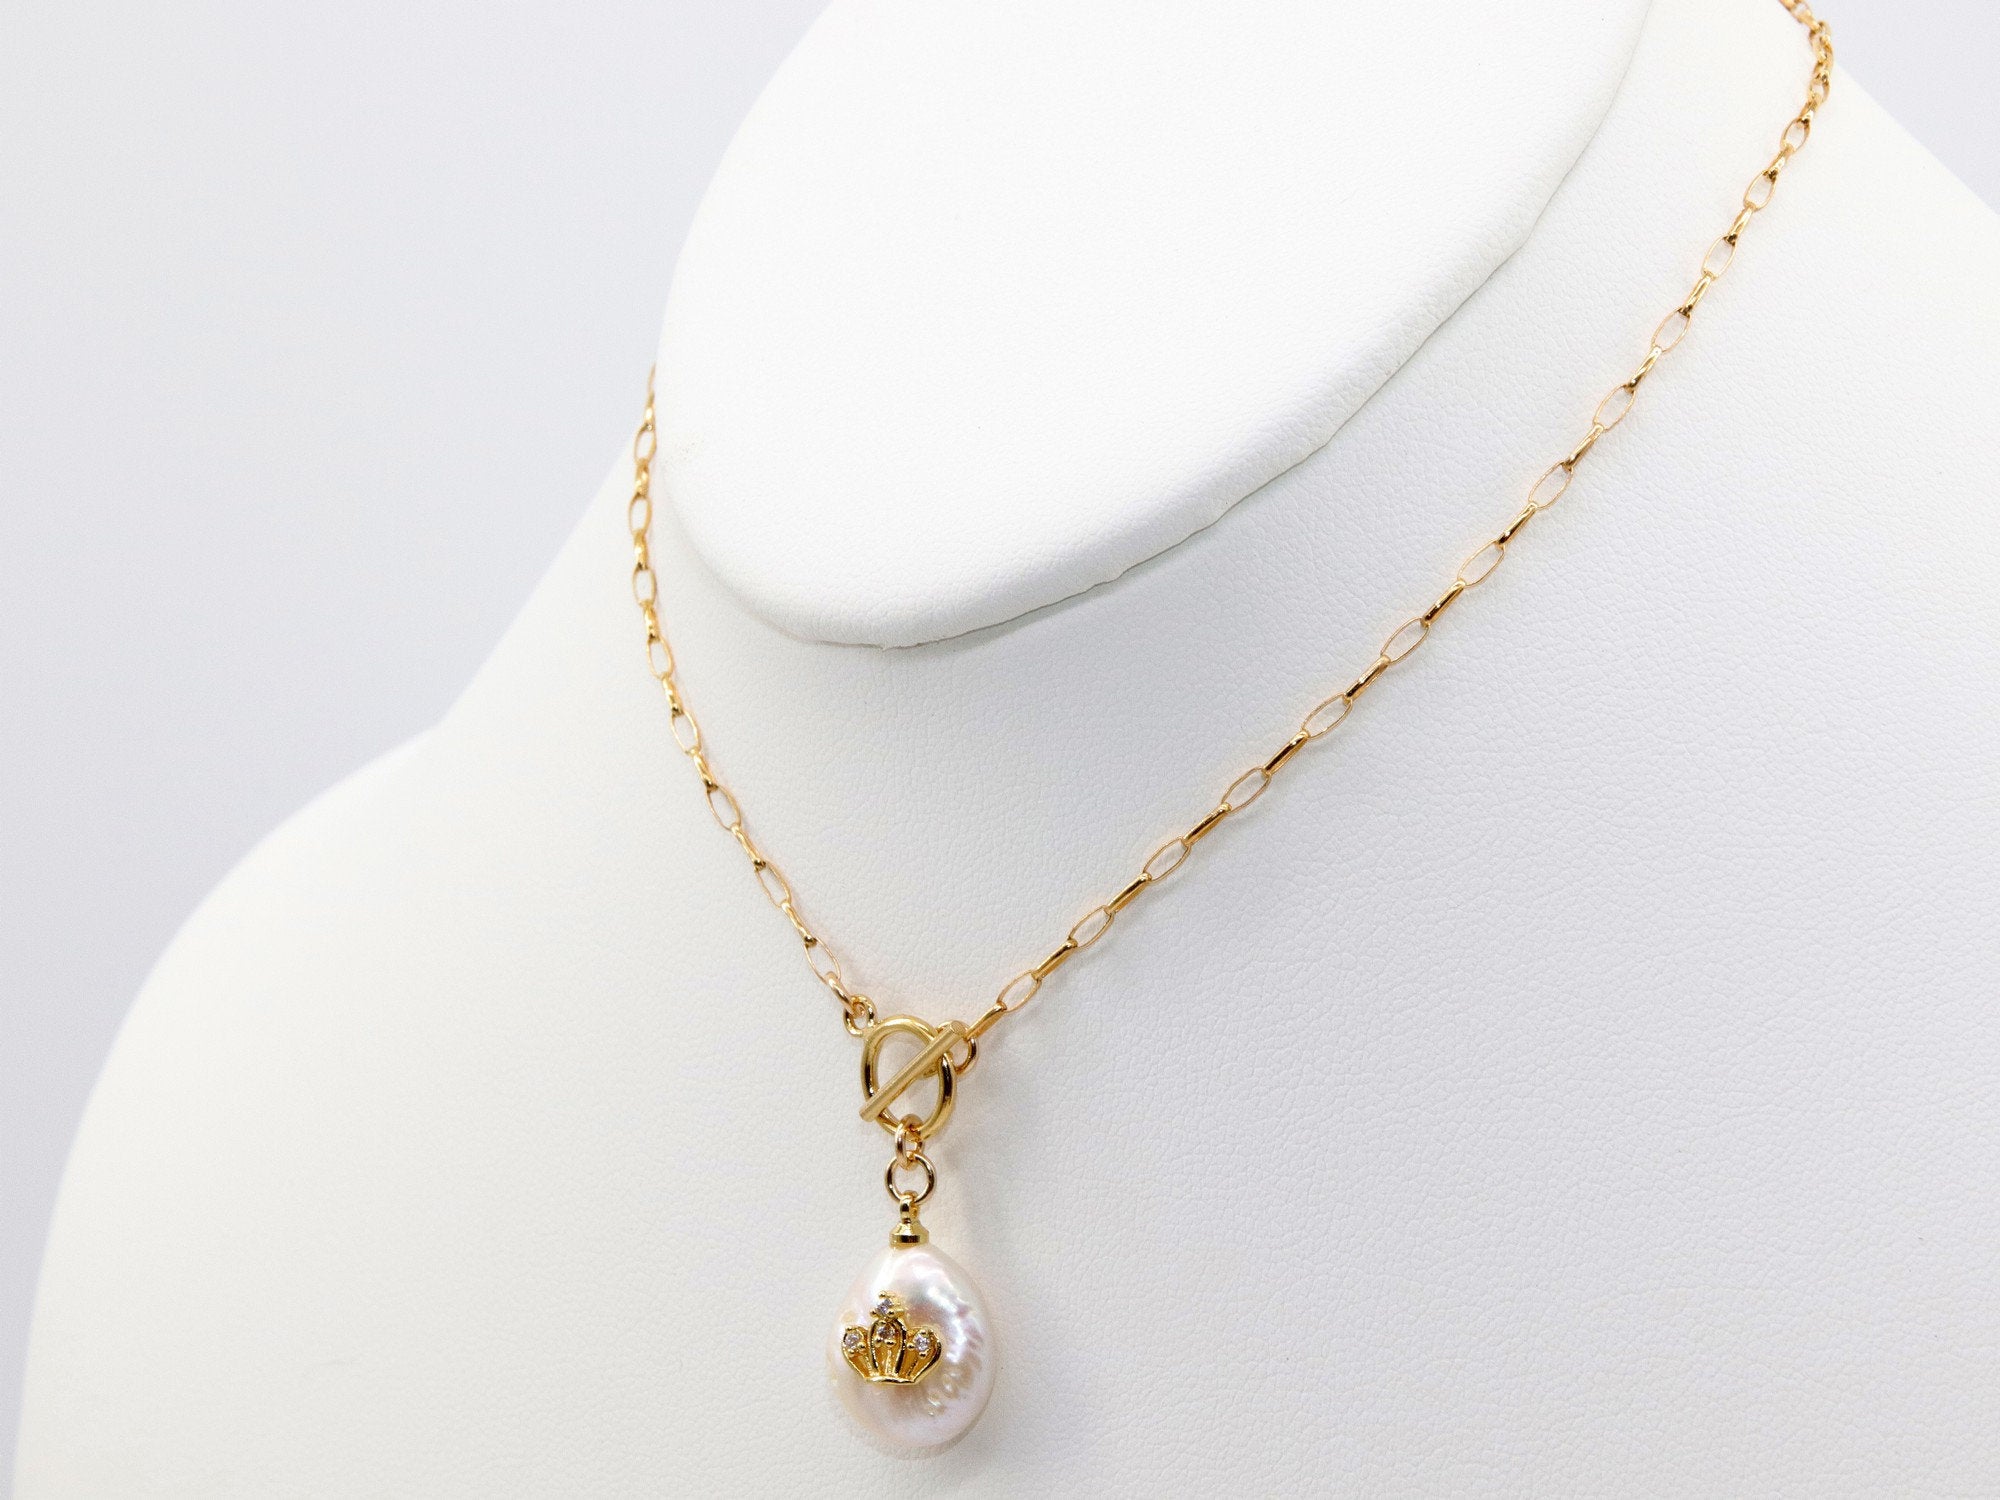 14 K Gold Pearl Cross Necklace, Toggle Front Wrap Layered Choker with Crown, Cross, Evil Eye Jewelry Choker, Dainty Real Pearl Necklace - A Girls Gems